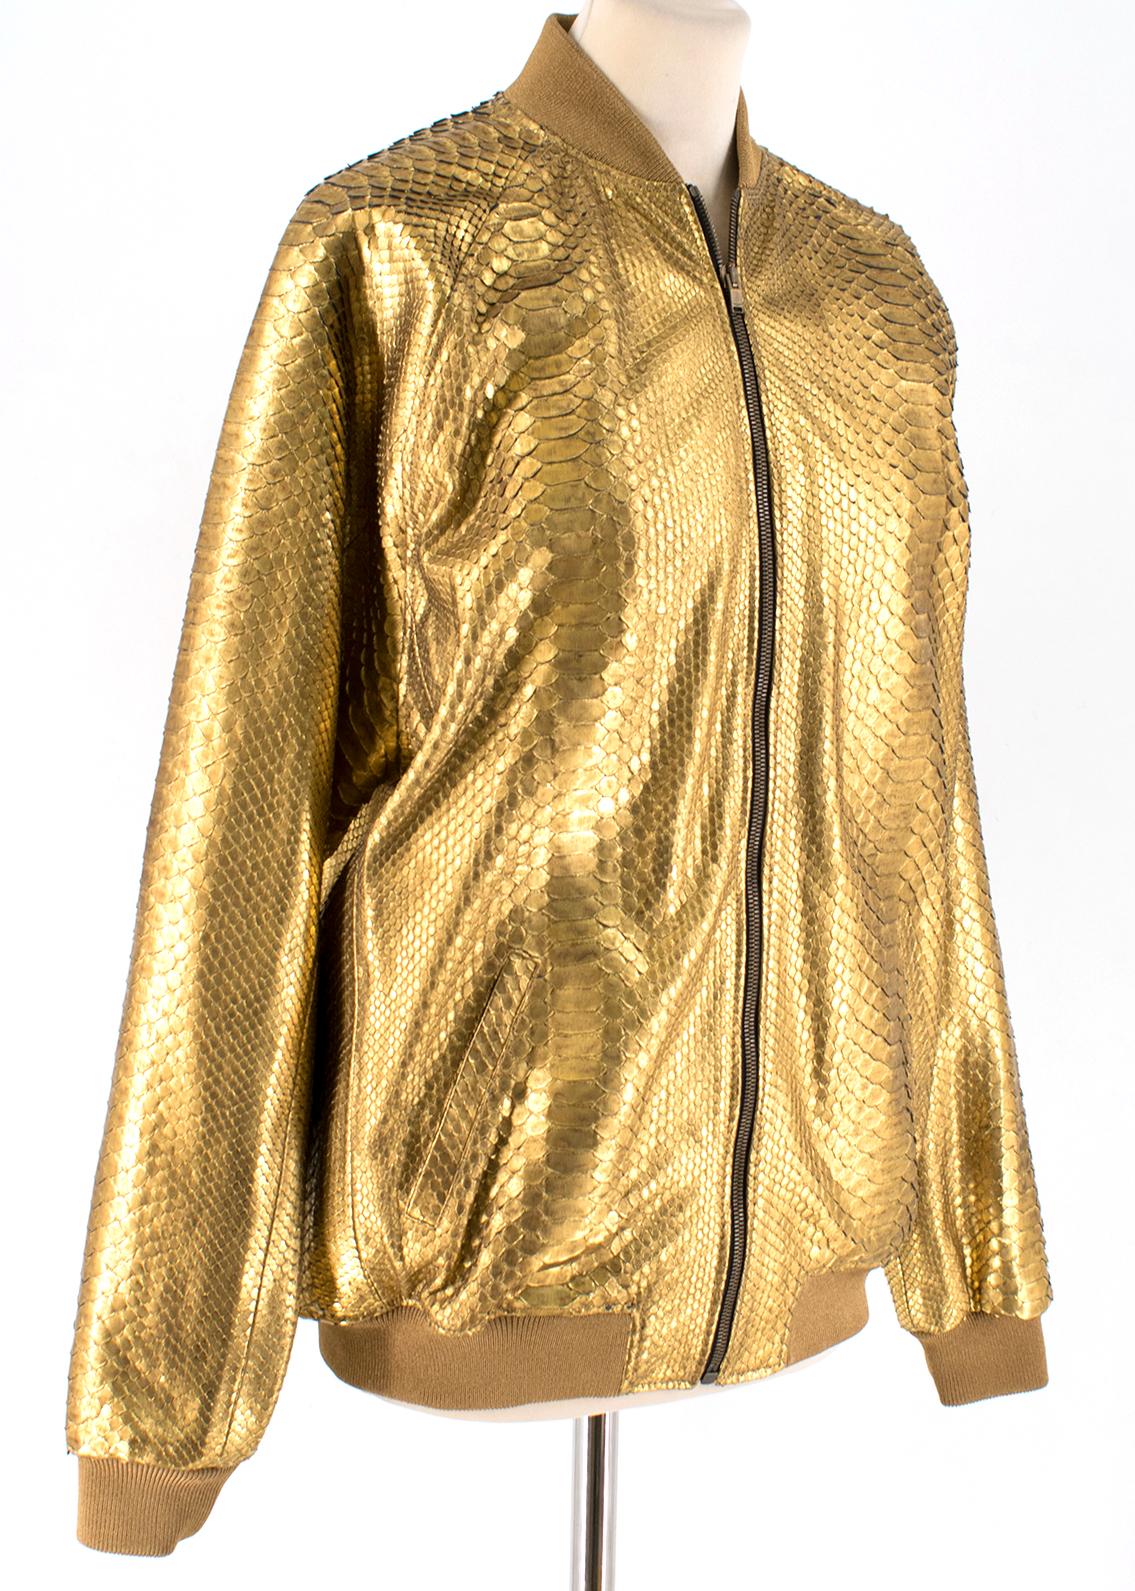 Saint Laurent Gold Python Bomber Jacket

- Gold python bomber jacket
- One of a kind exotic piece
- Lightweight
- Centre-front zip fastening
- Ribbed collar, cuffs and hem
- Front side pockets

Original Retail Price (Approx.) £10,000.00

Please